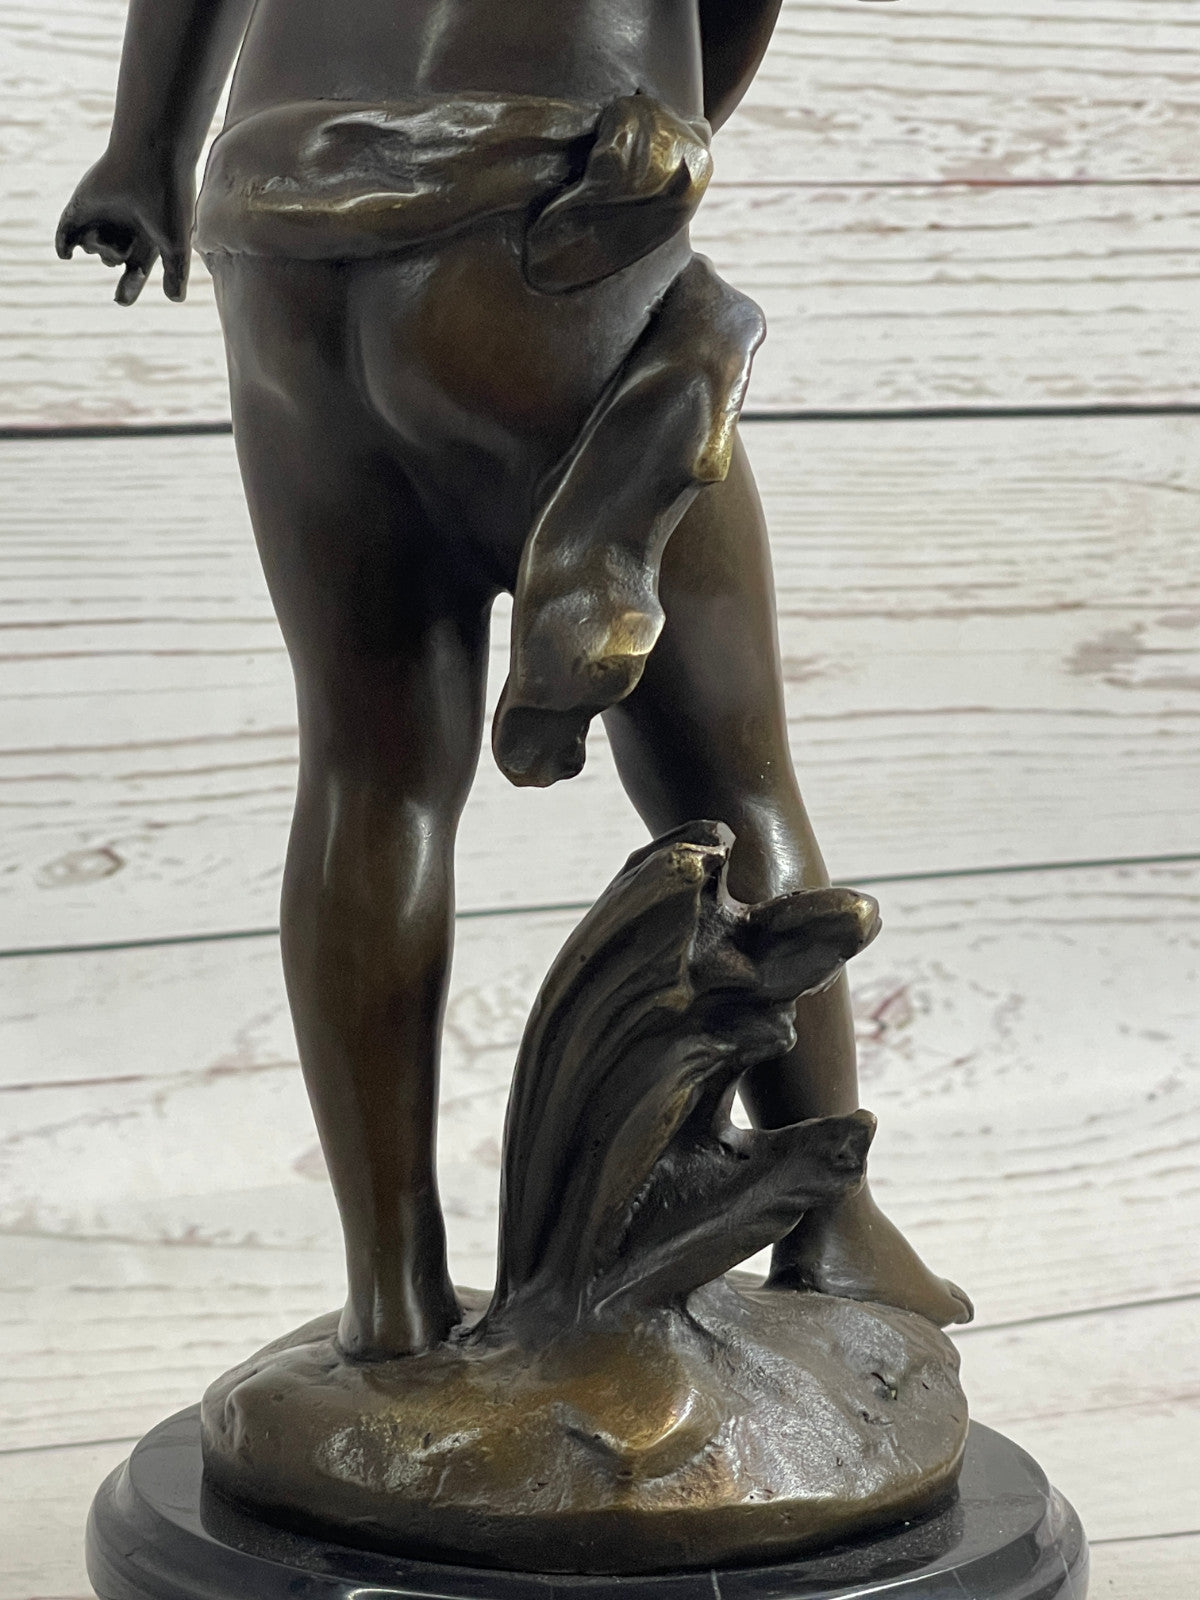 Moreau Bronze Sculpture of Young Boy Musician with Banjo Hot Cast